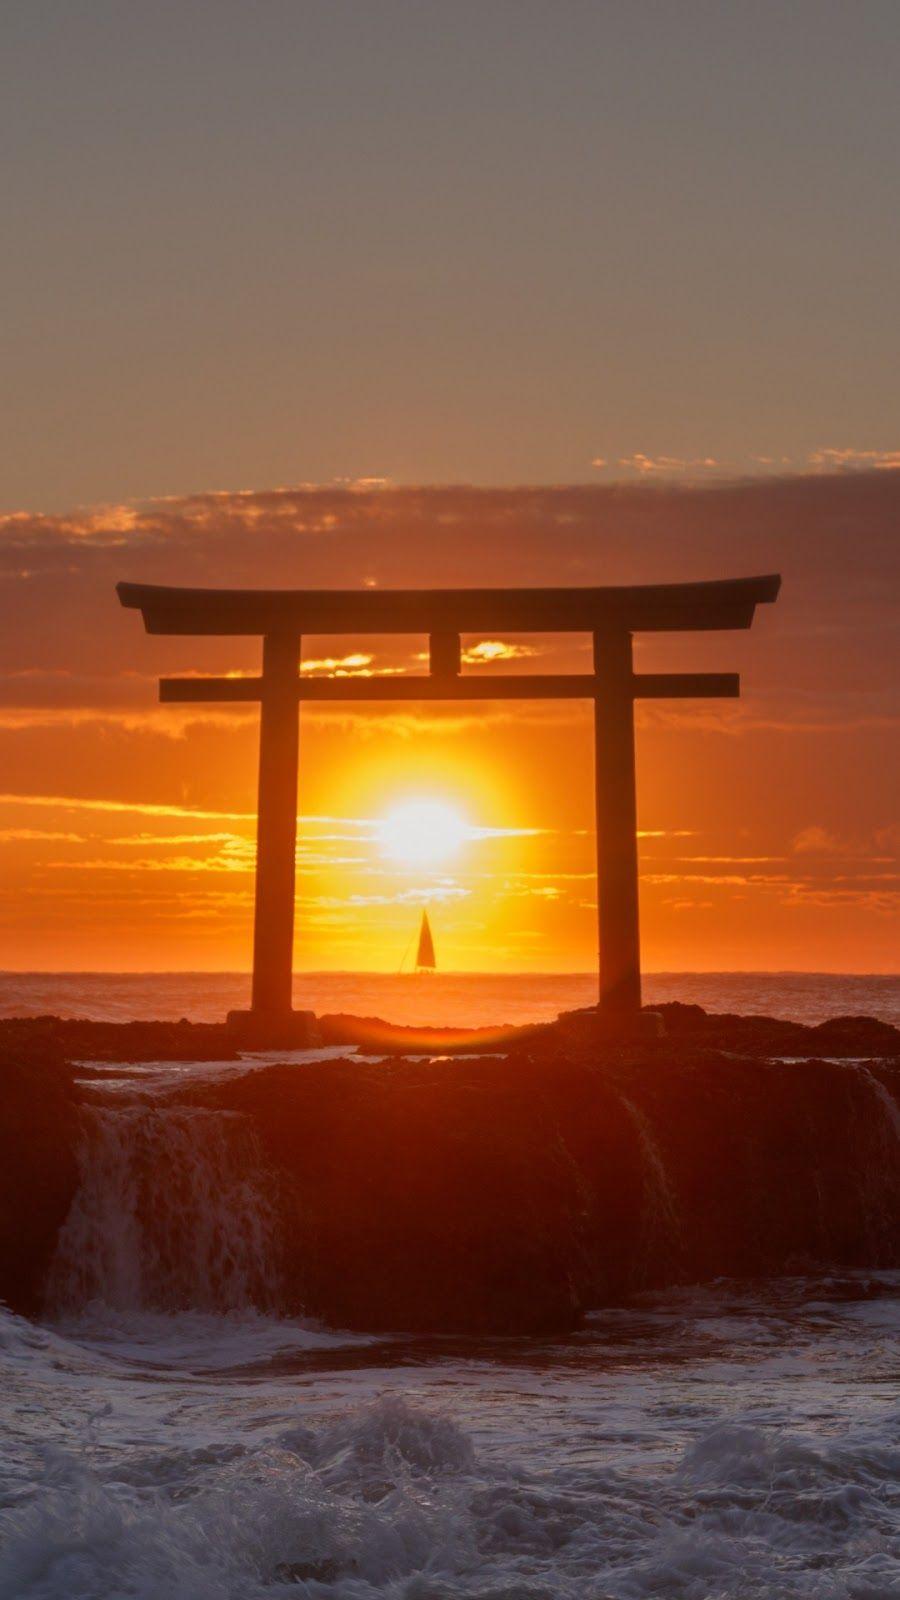 Sunset in Japan. Aesthetic photography nature